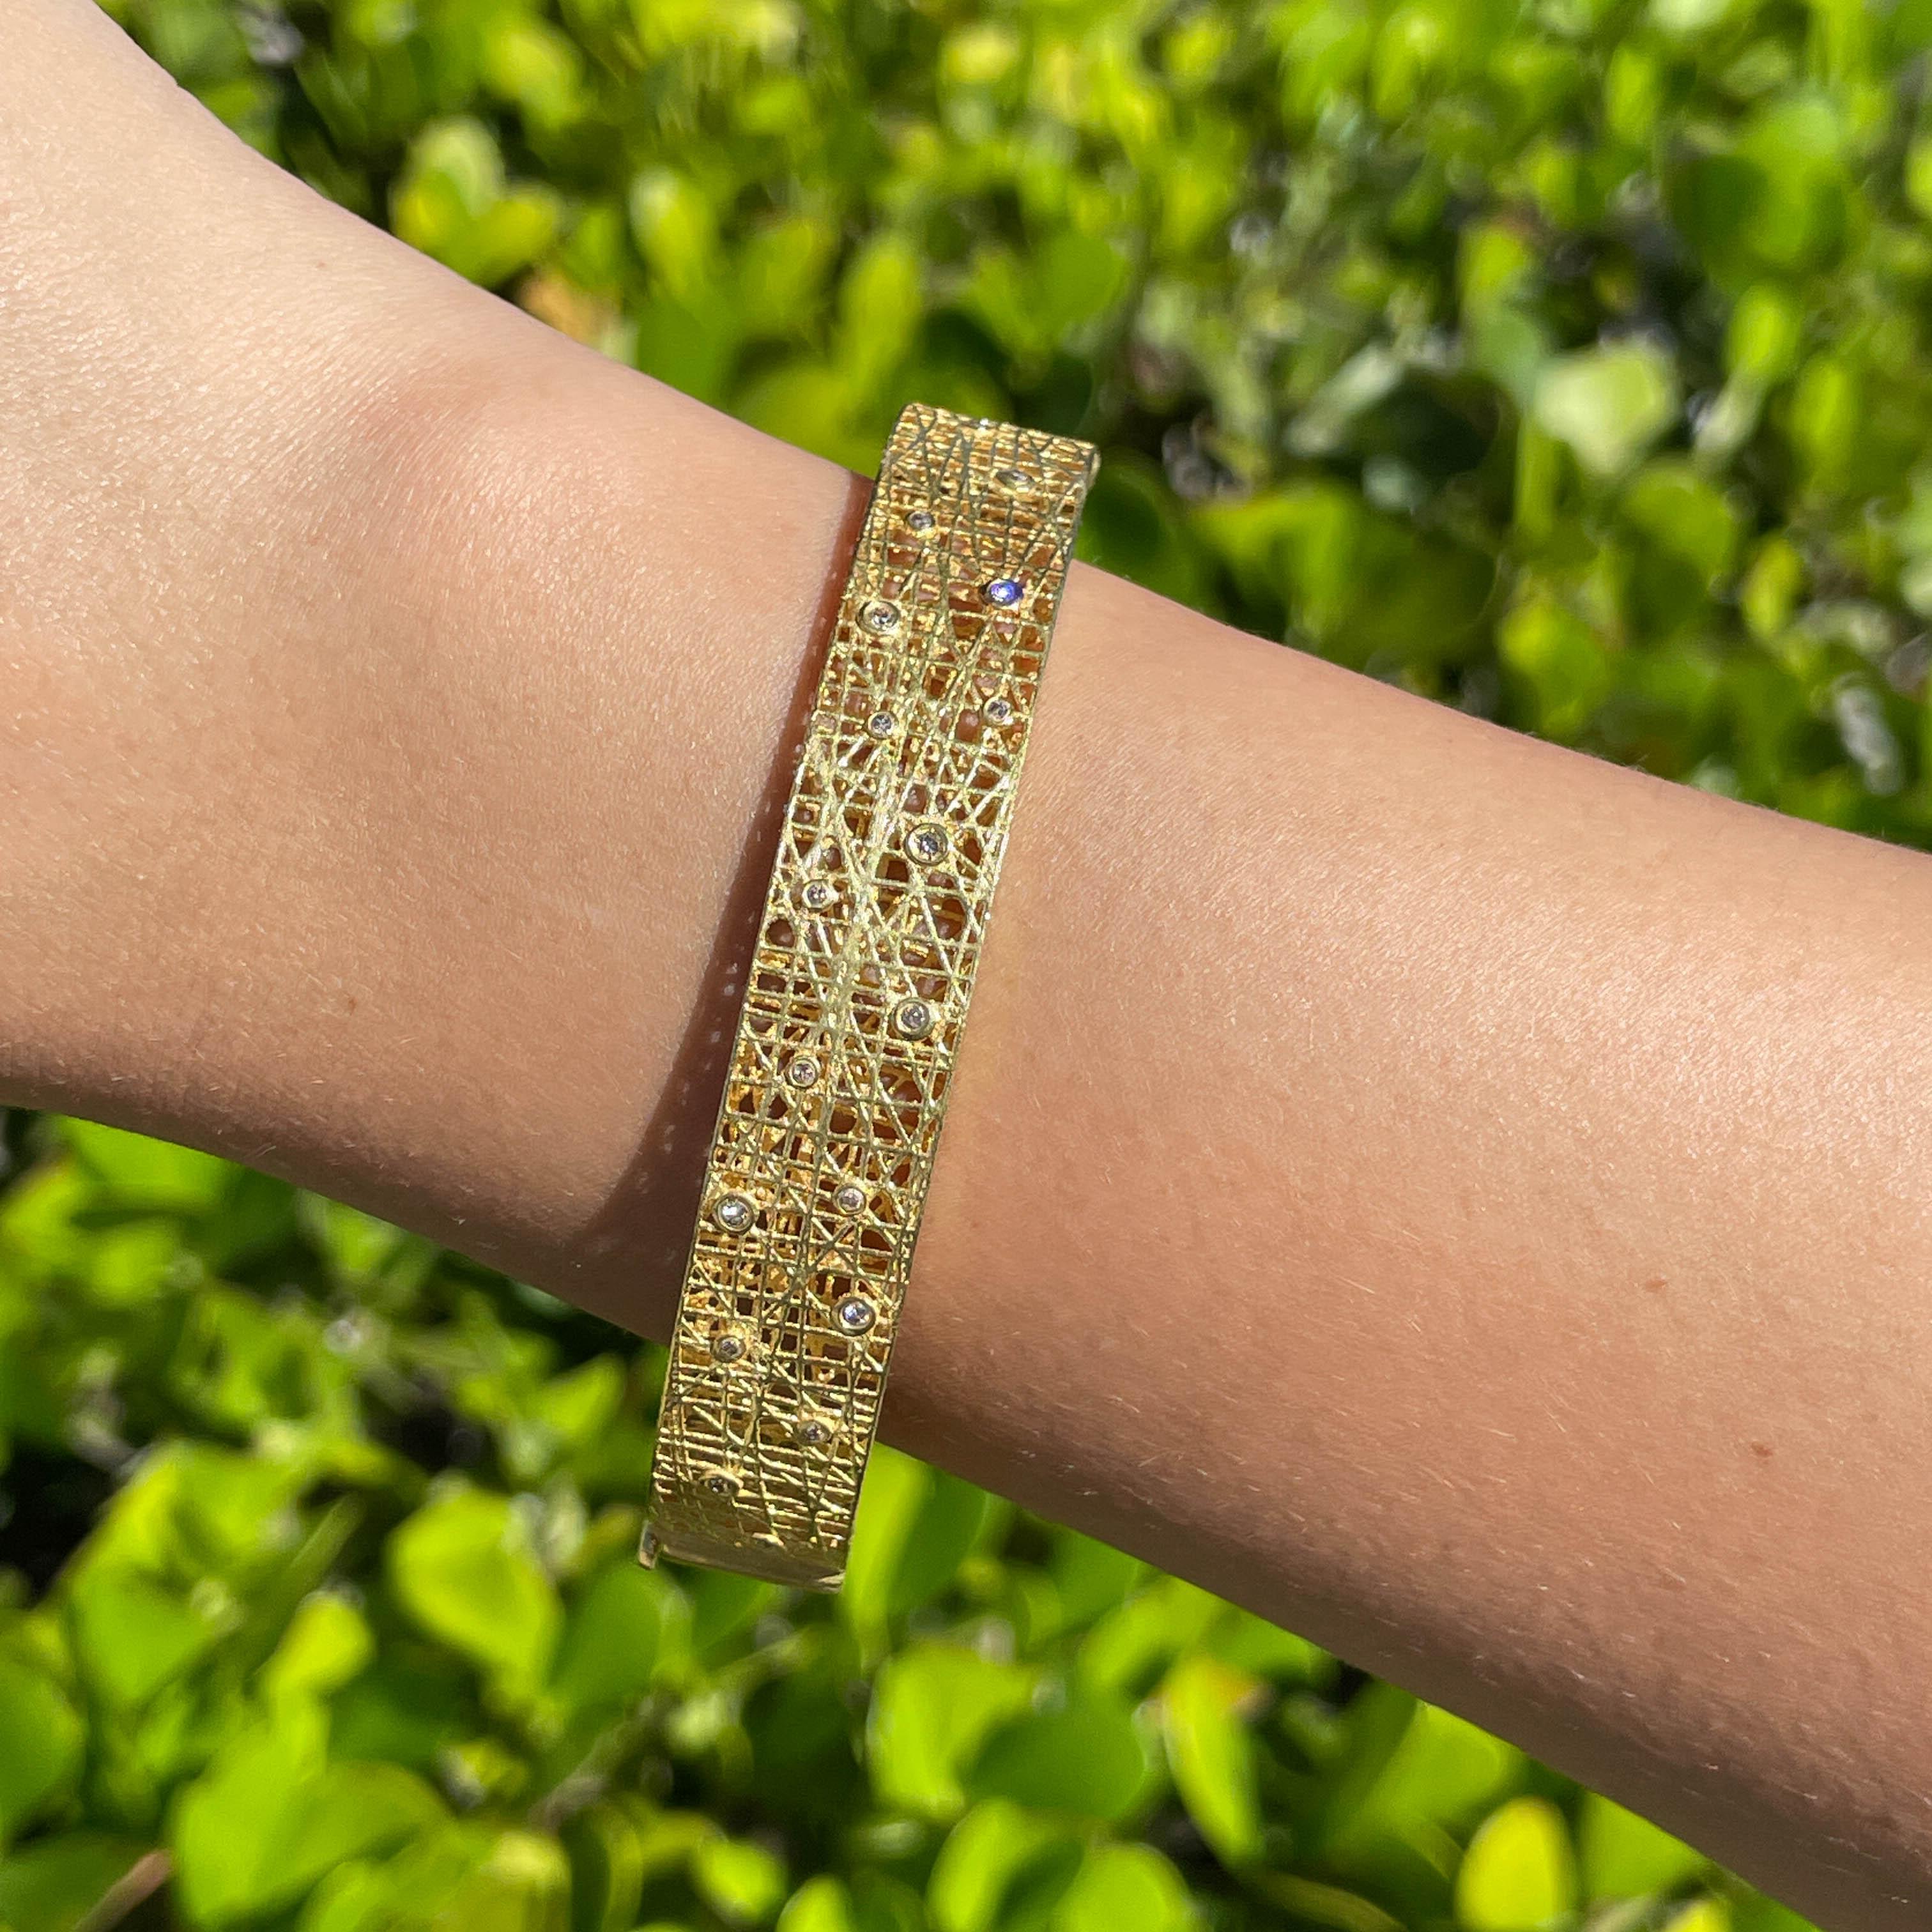 Jay Feder 18k Yellow Gold Diamond Lace Bangle Bracelet

Set with 0.35ctw round brilliant diamonds. The bangle is 2.75inches in diameter and 12.08mm wide. Total weight is 20.2 grams. 

Please view our photos and videos for more details.

Good